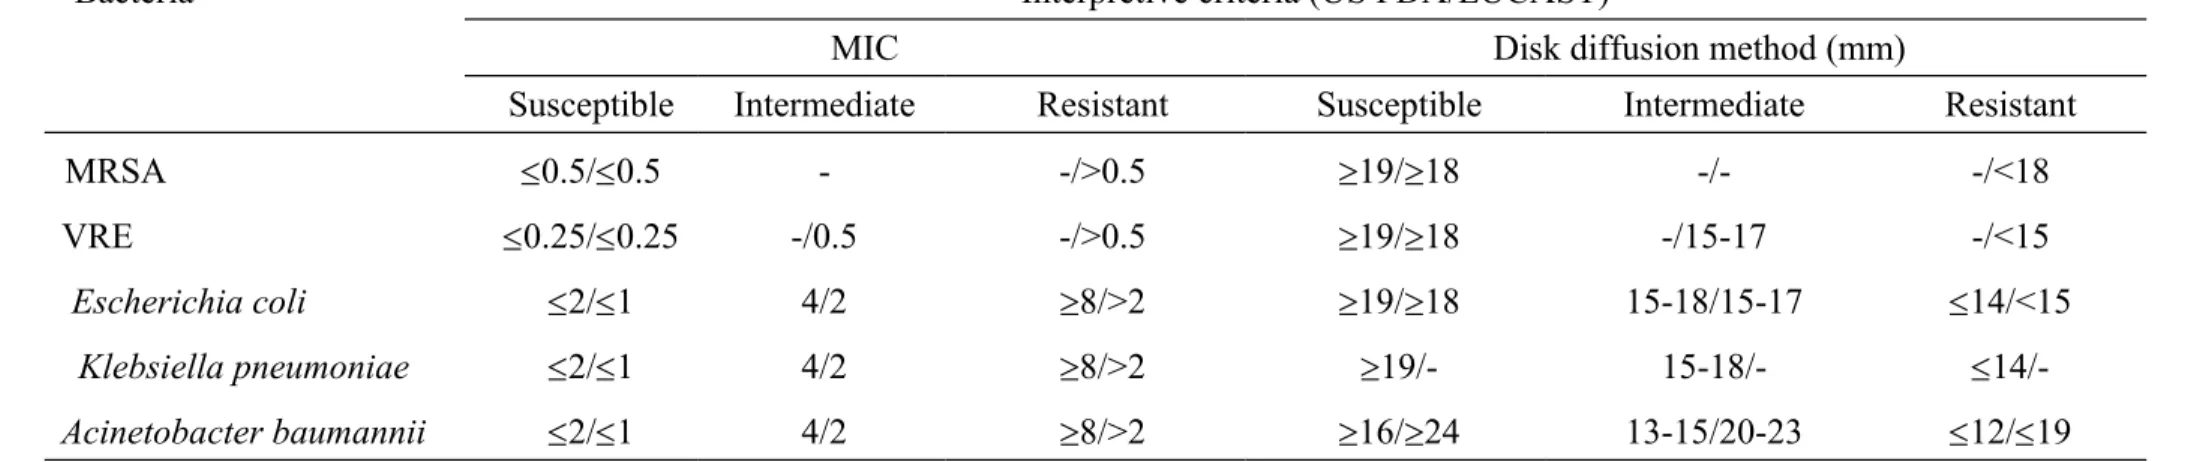 TABLE 1. Interpretive minimum inhibitory concentration (MIC) and disk diffusion interpretive criteria for Gram-positive and Gram-negative  bacteria applied in this study